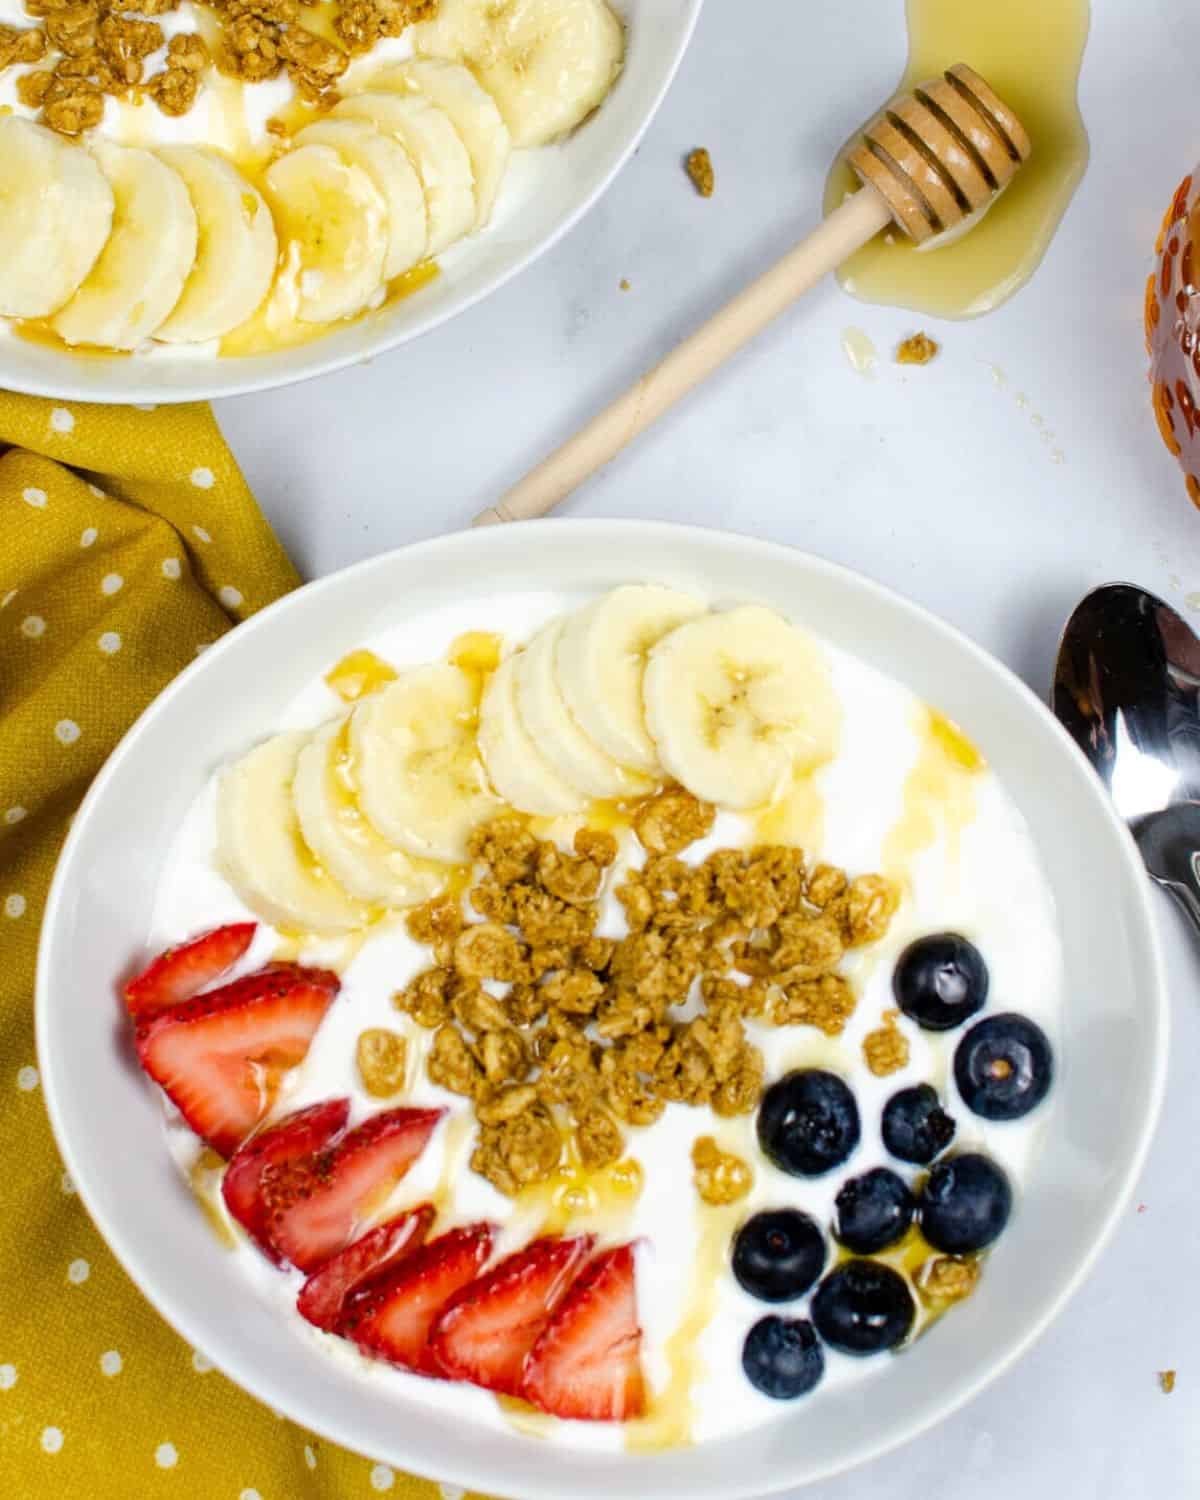 Instant pot greek yogurt in a bowl with bananas, granola, and berries.